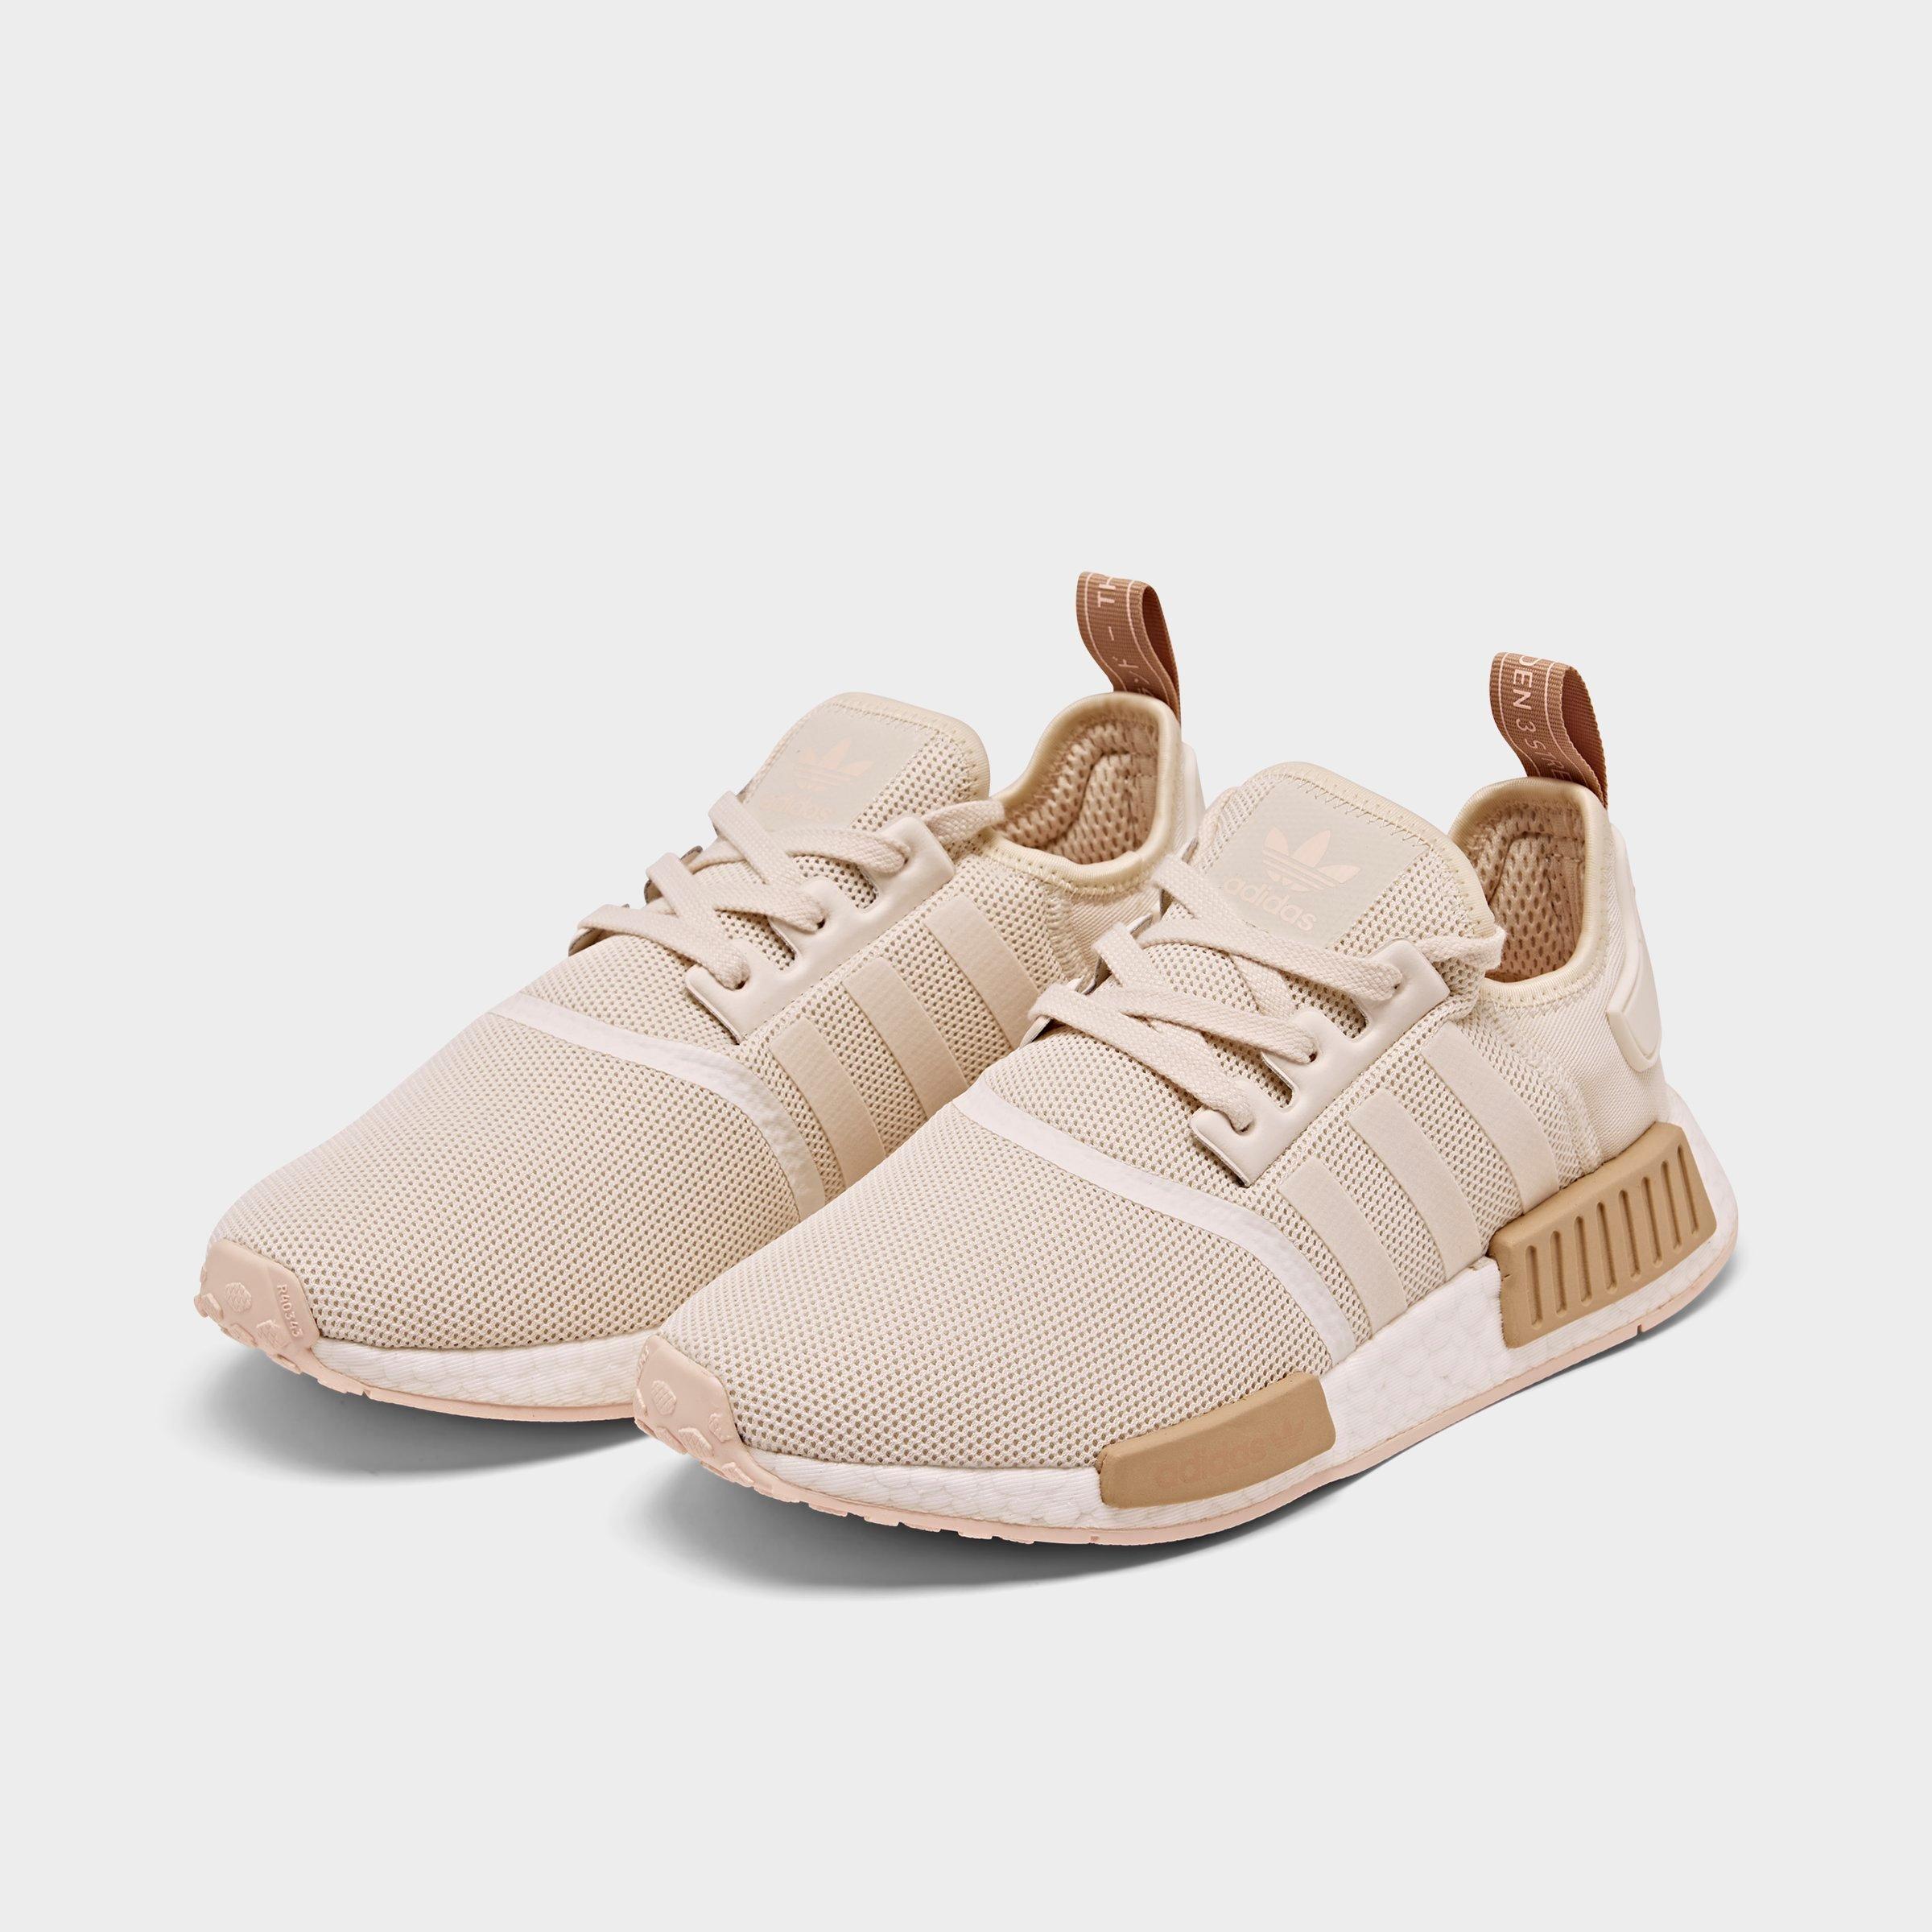 Women's adidas R1 Casual Shoes| Finish Line